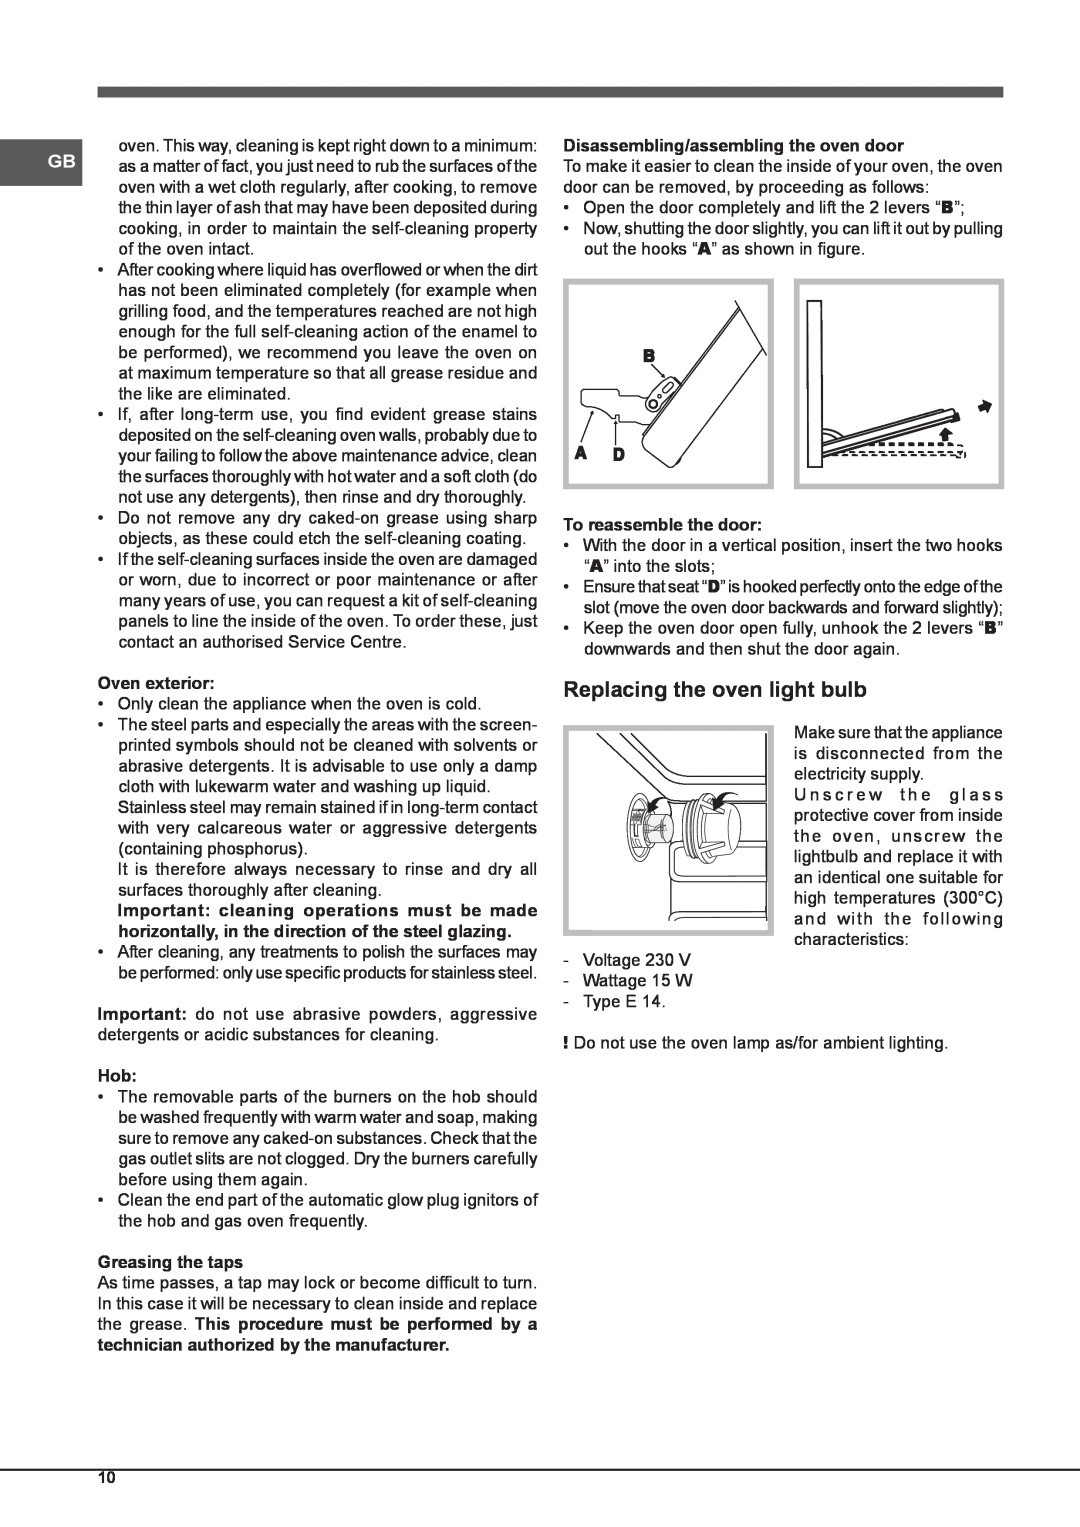 Indesit KP9 F11 S/G S manual Replacing the oven light bulb, Oven exterior, Disassembling/assembling the oven door 